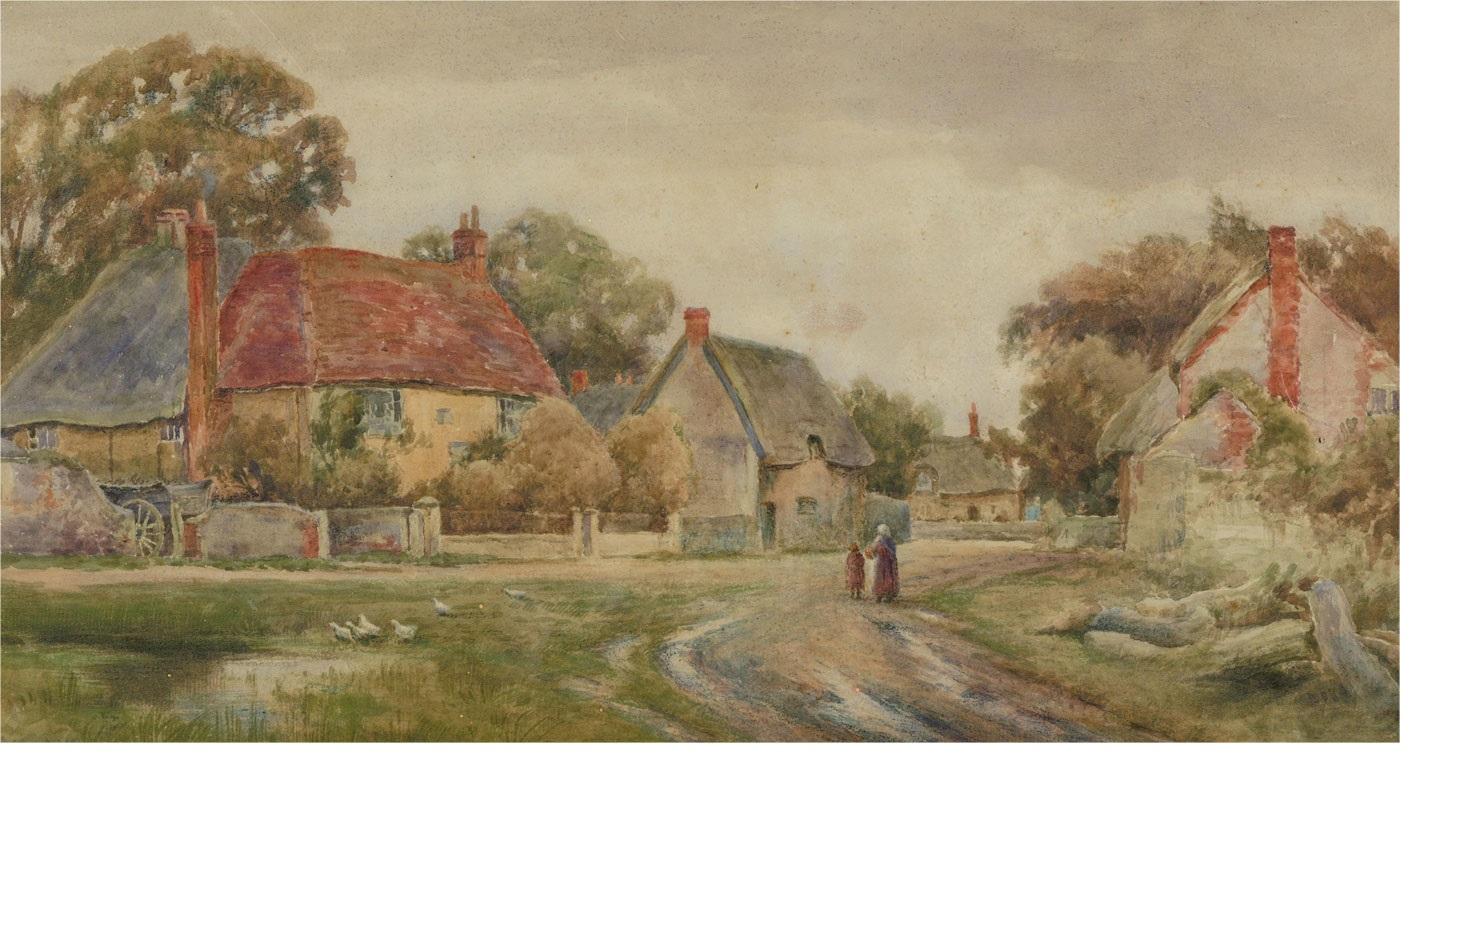 A wonderful watercolour depiction of 19th Century rural life. The scene shows a mother and daughter returning to their hamlet down a dirt path, a small pond with geese to the left and thatched cottages curve off down the road to the right. The